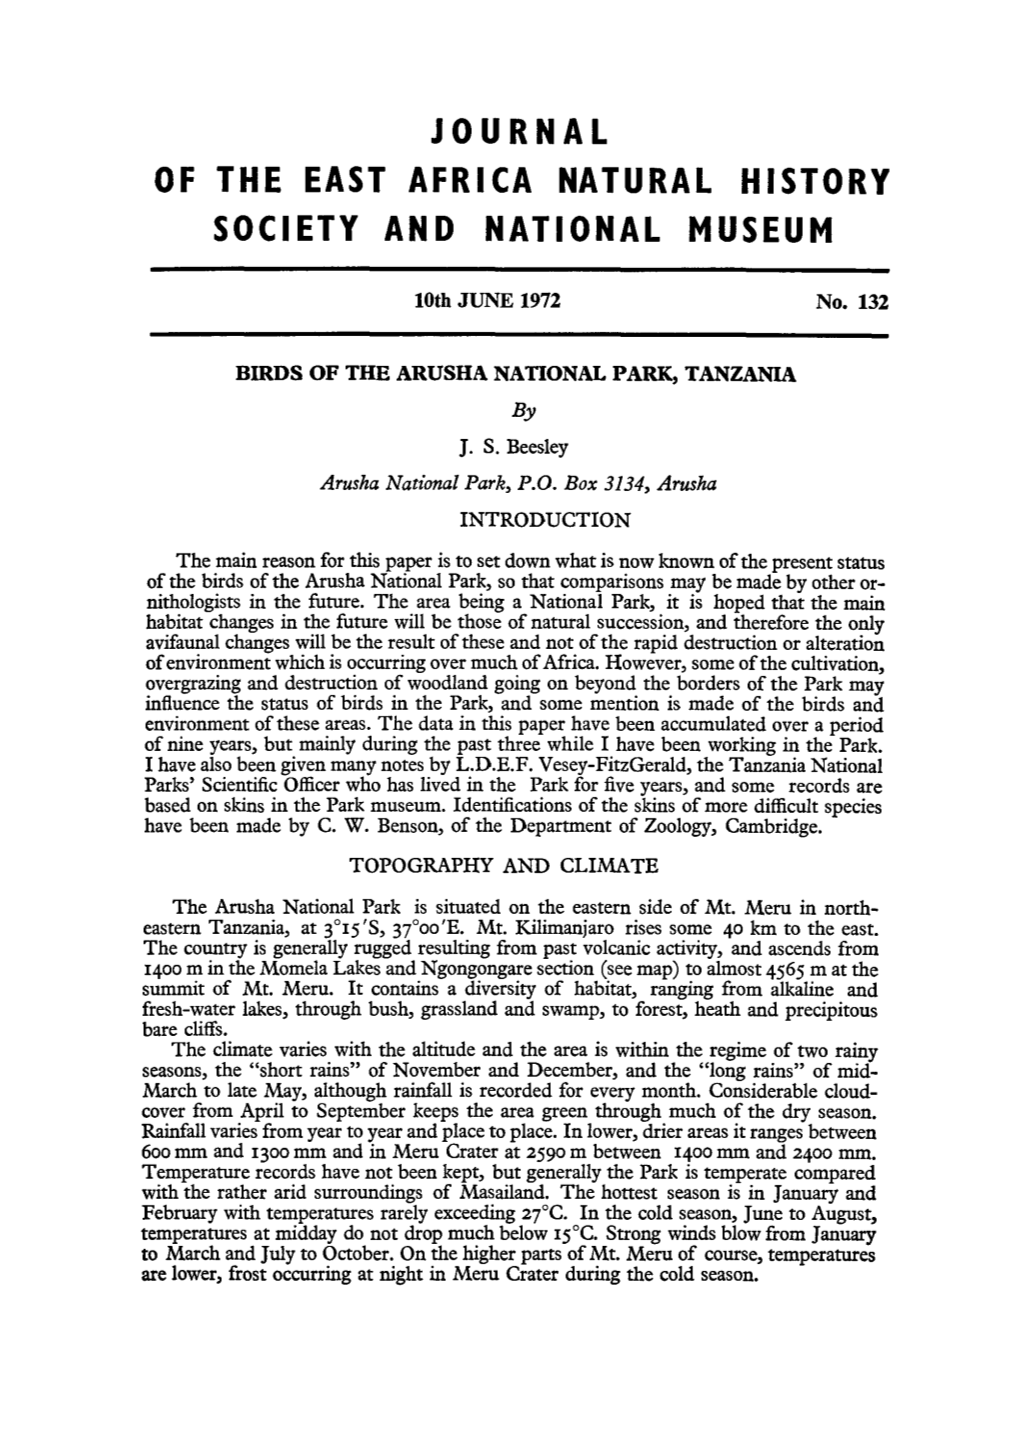 Journal of the East Afri Ca Natural History Society